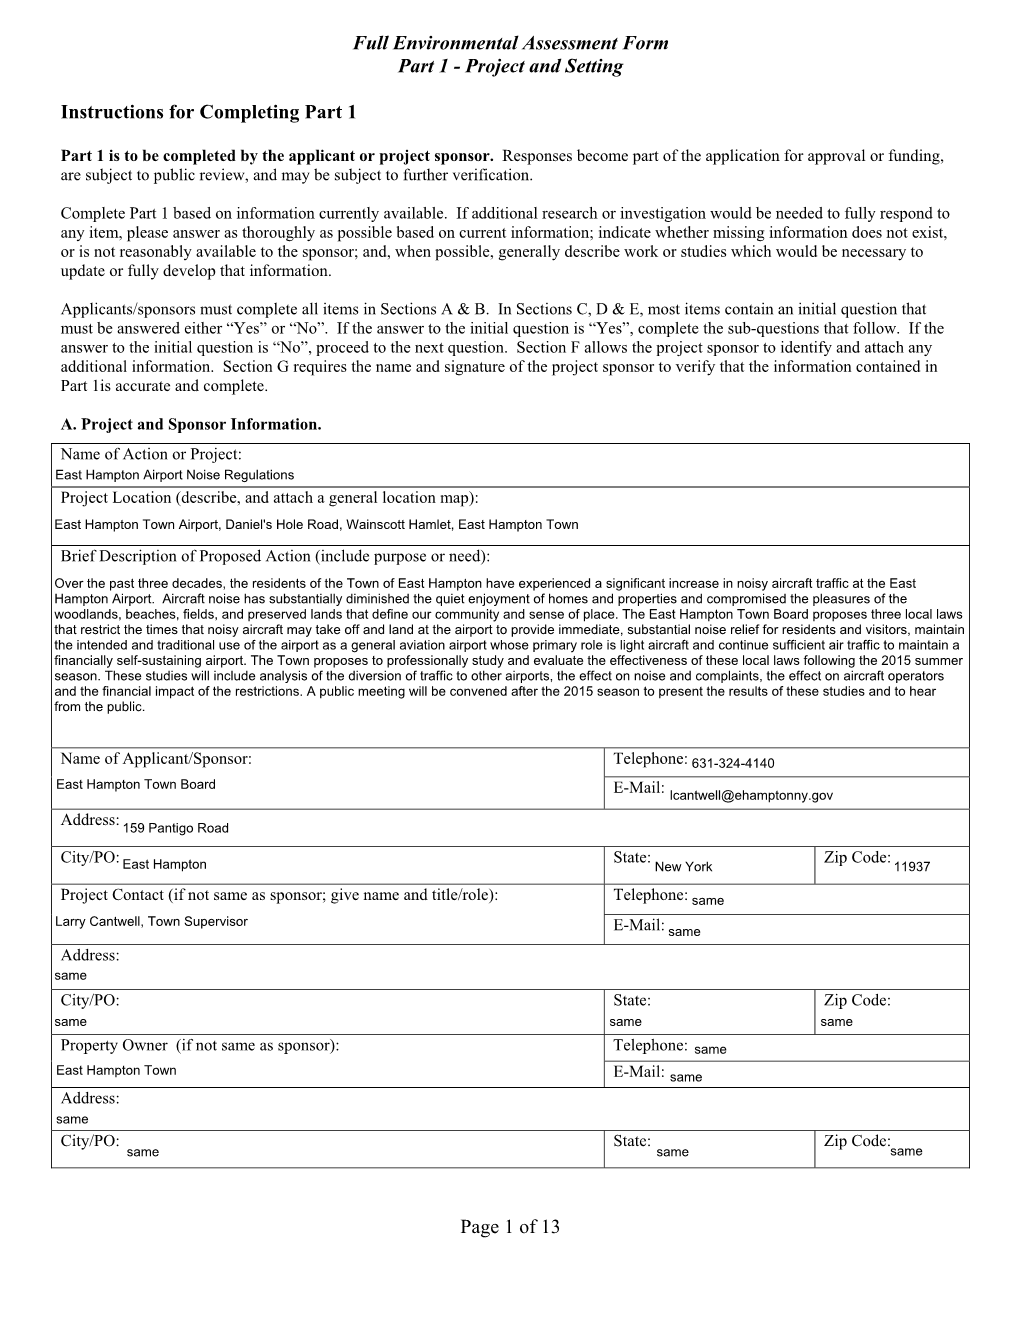 Full Environmental Assessment Form Part 1 - Project and Setting